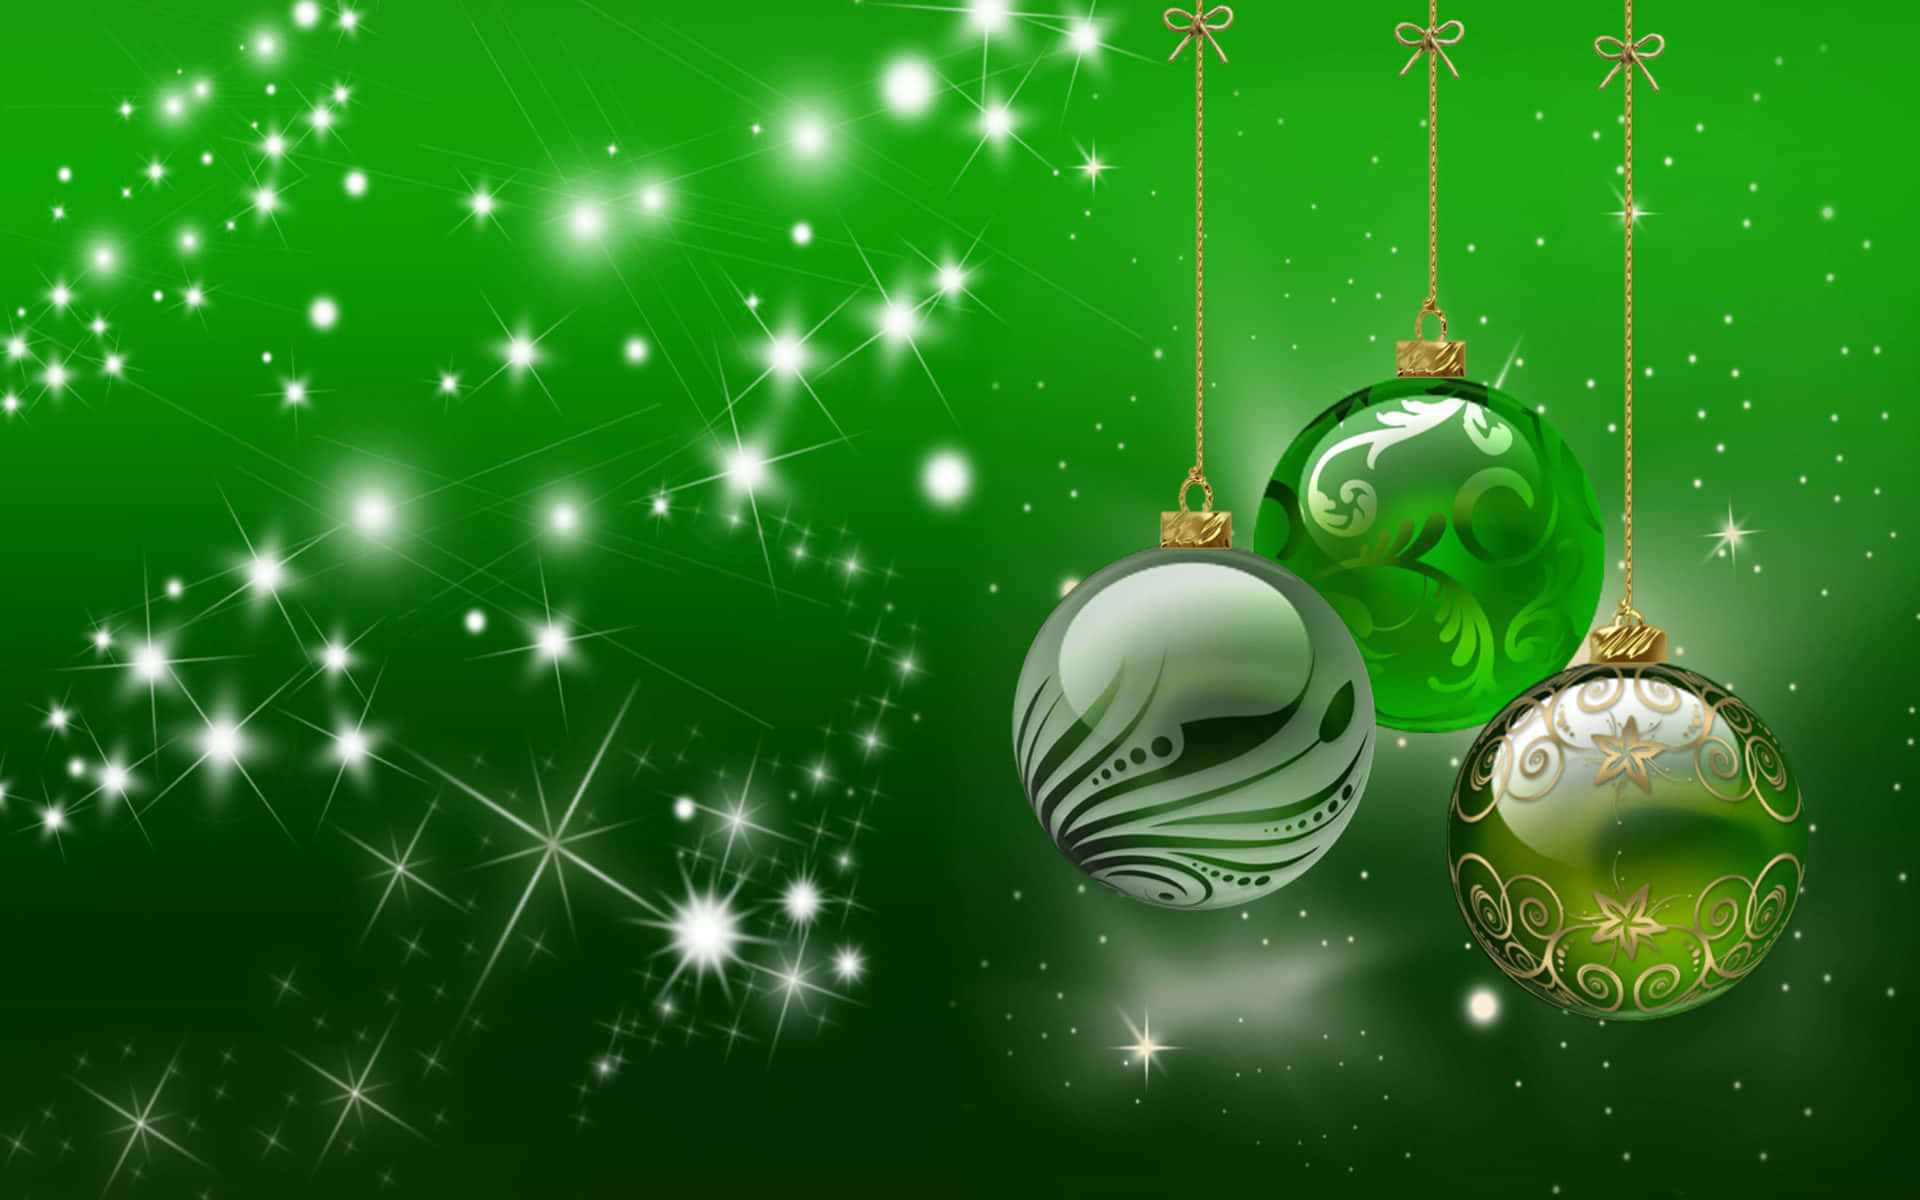 Download A Joyous Occasion for the Holidays | Wallpapers.com